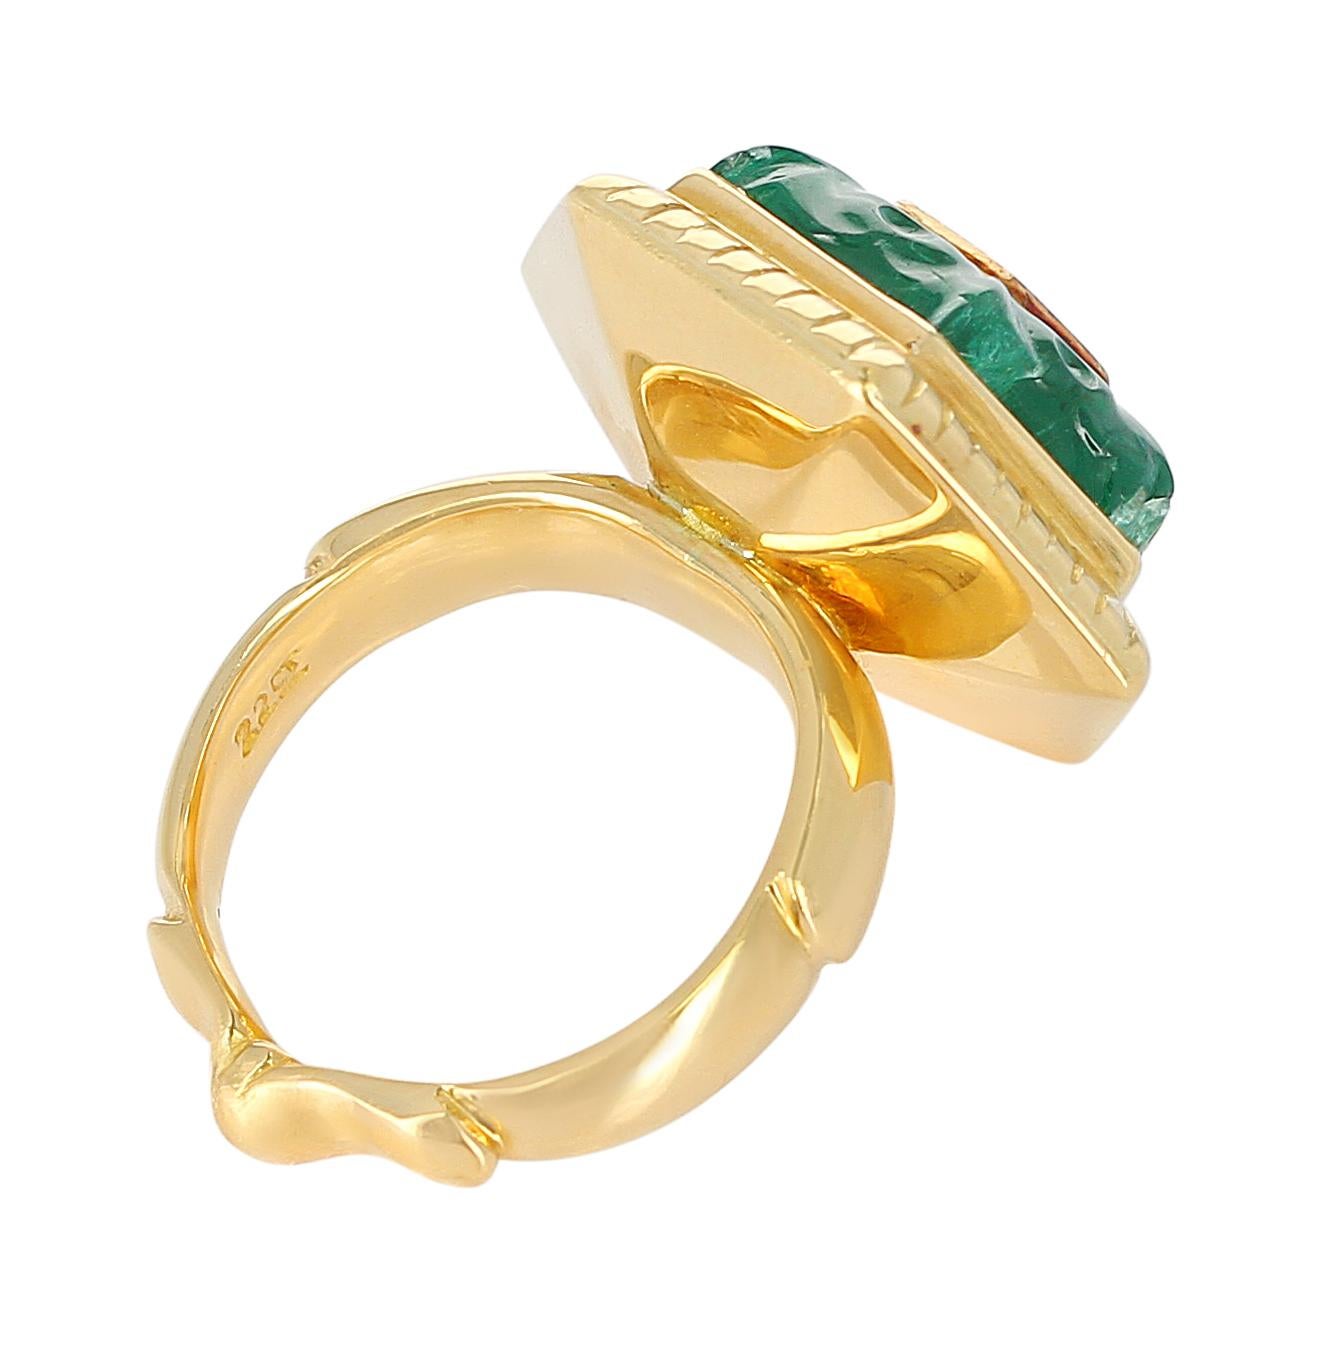 Emerald Carving Ring, Center Diamond Rose Cut, 22 Karat Yellow Gold In Excellent Condition For Sale In New York, NY